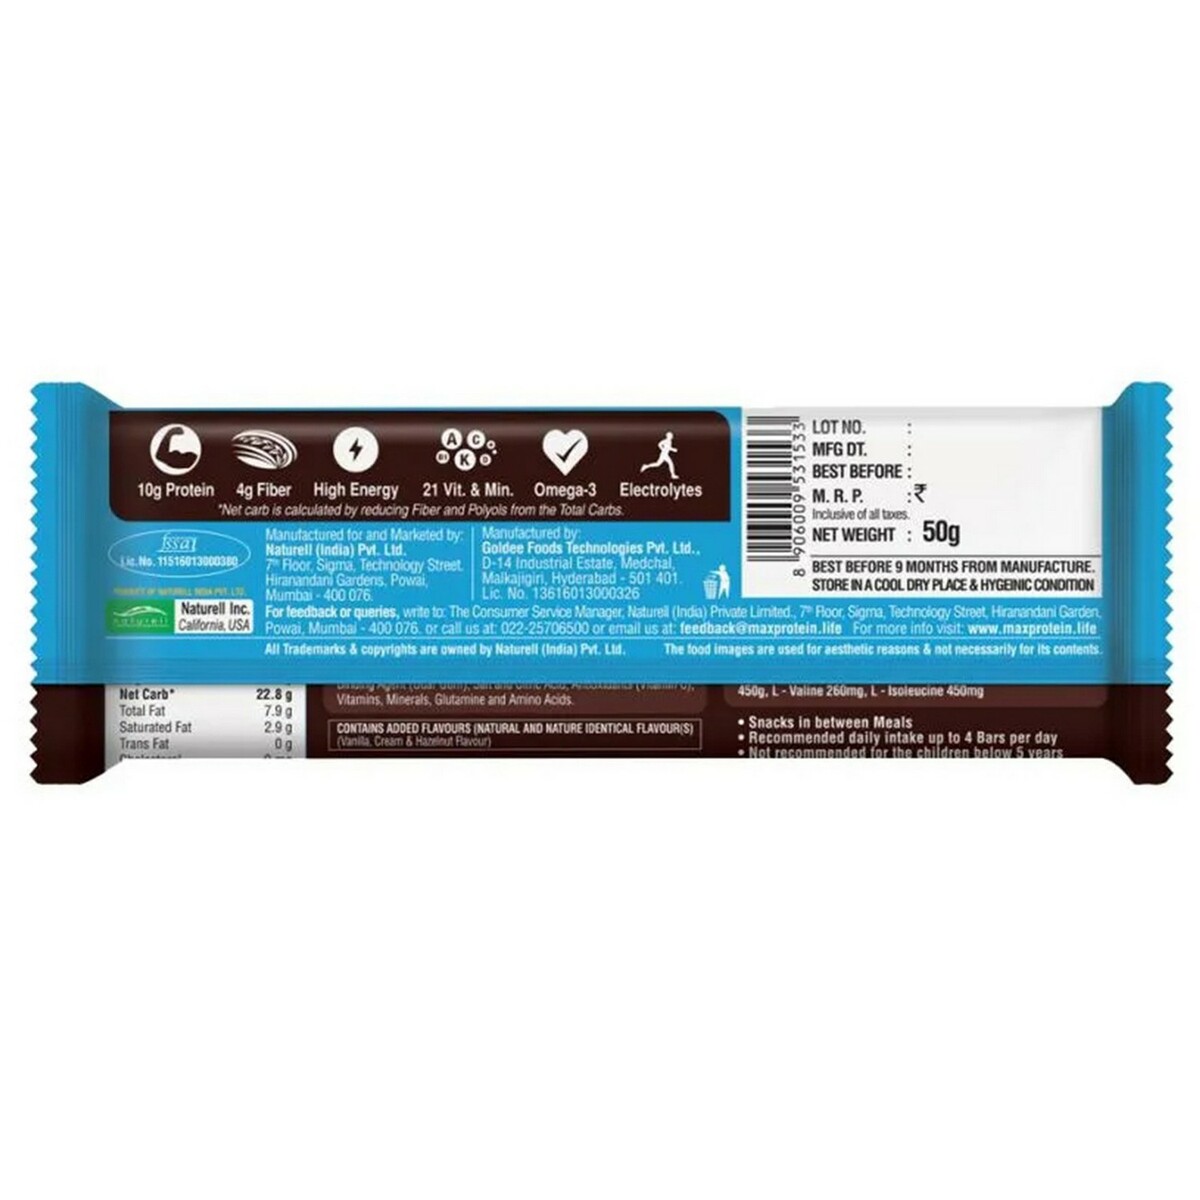 Rite Bite Work-Out Choco Classic Nutrition Bar 50g